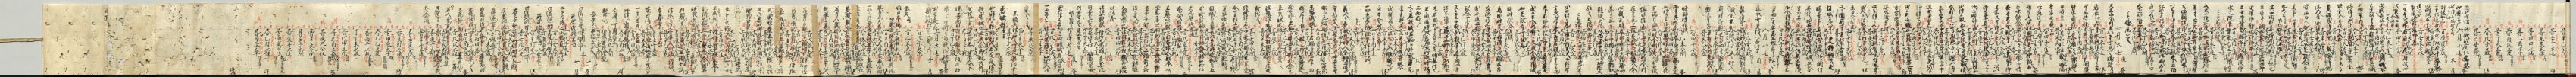 Scroll of Miscellaneous Notes written on a Calendar by Priest Seigen (verso)